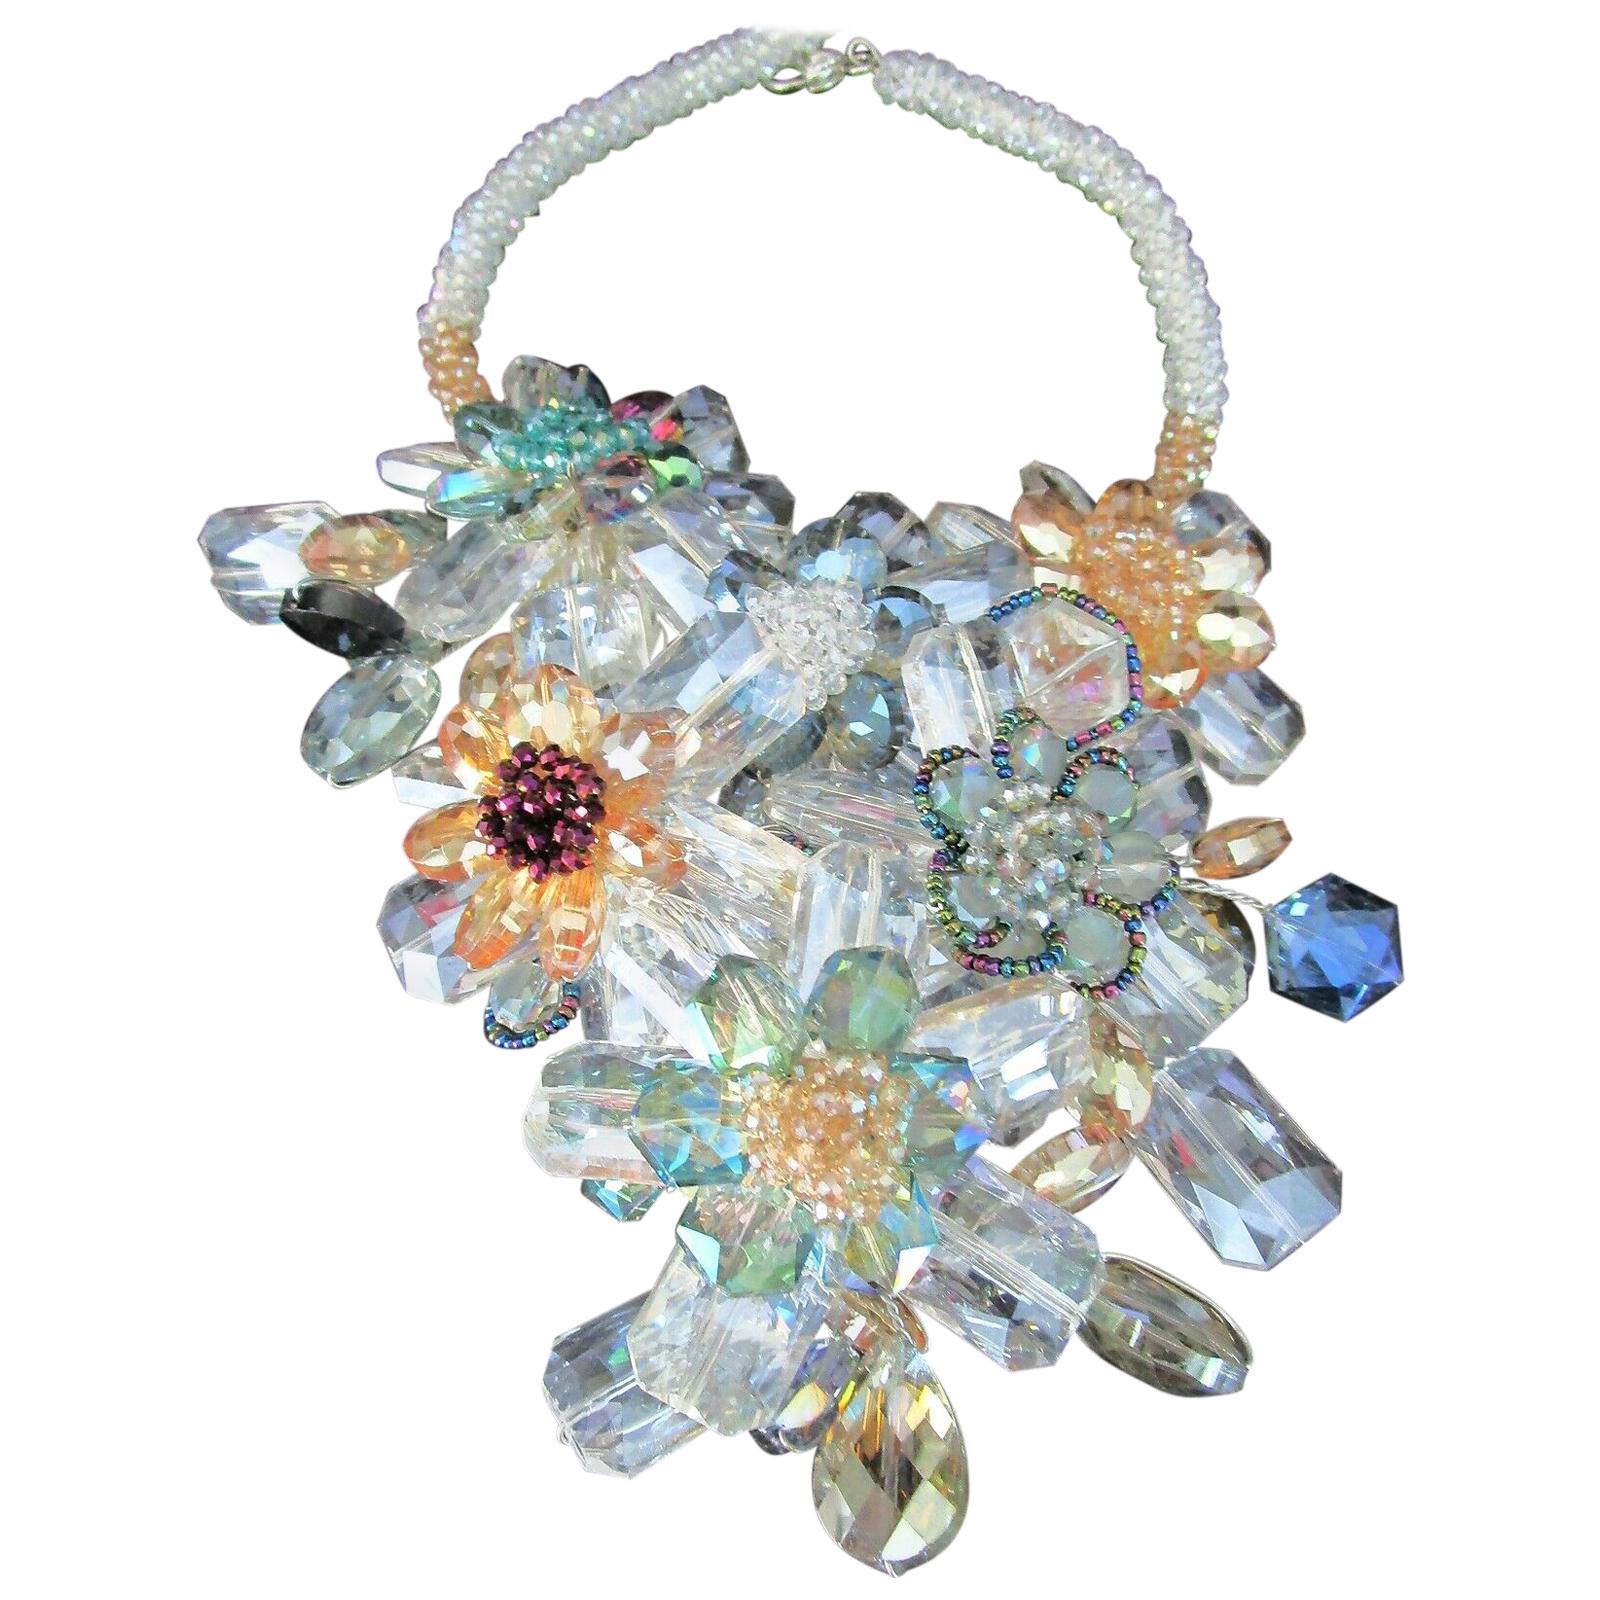 Crystal Flowers and Wrapped Wire Collar Bib Statement Necklace  